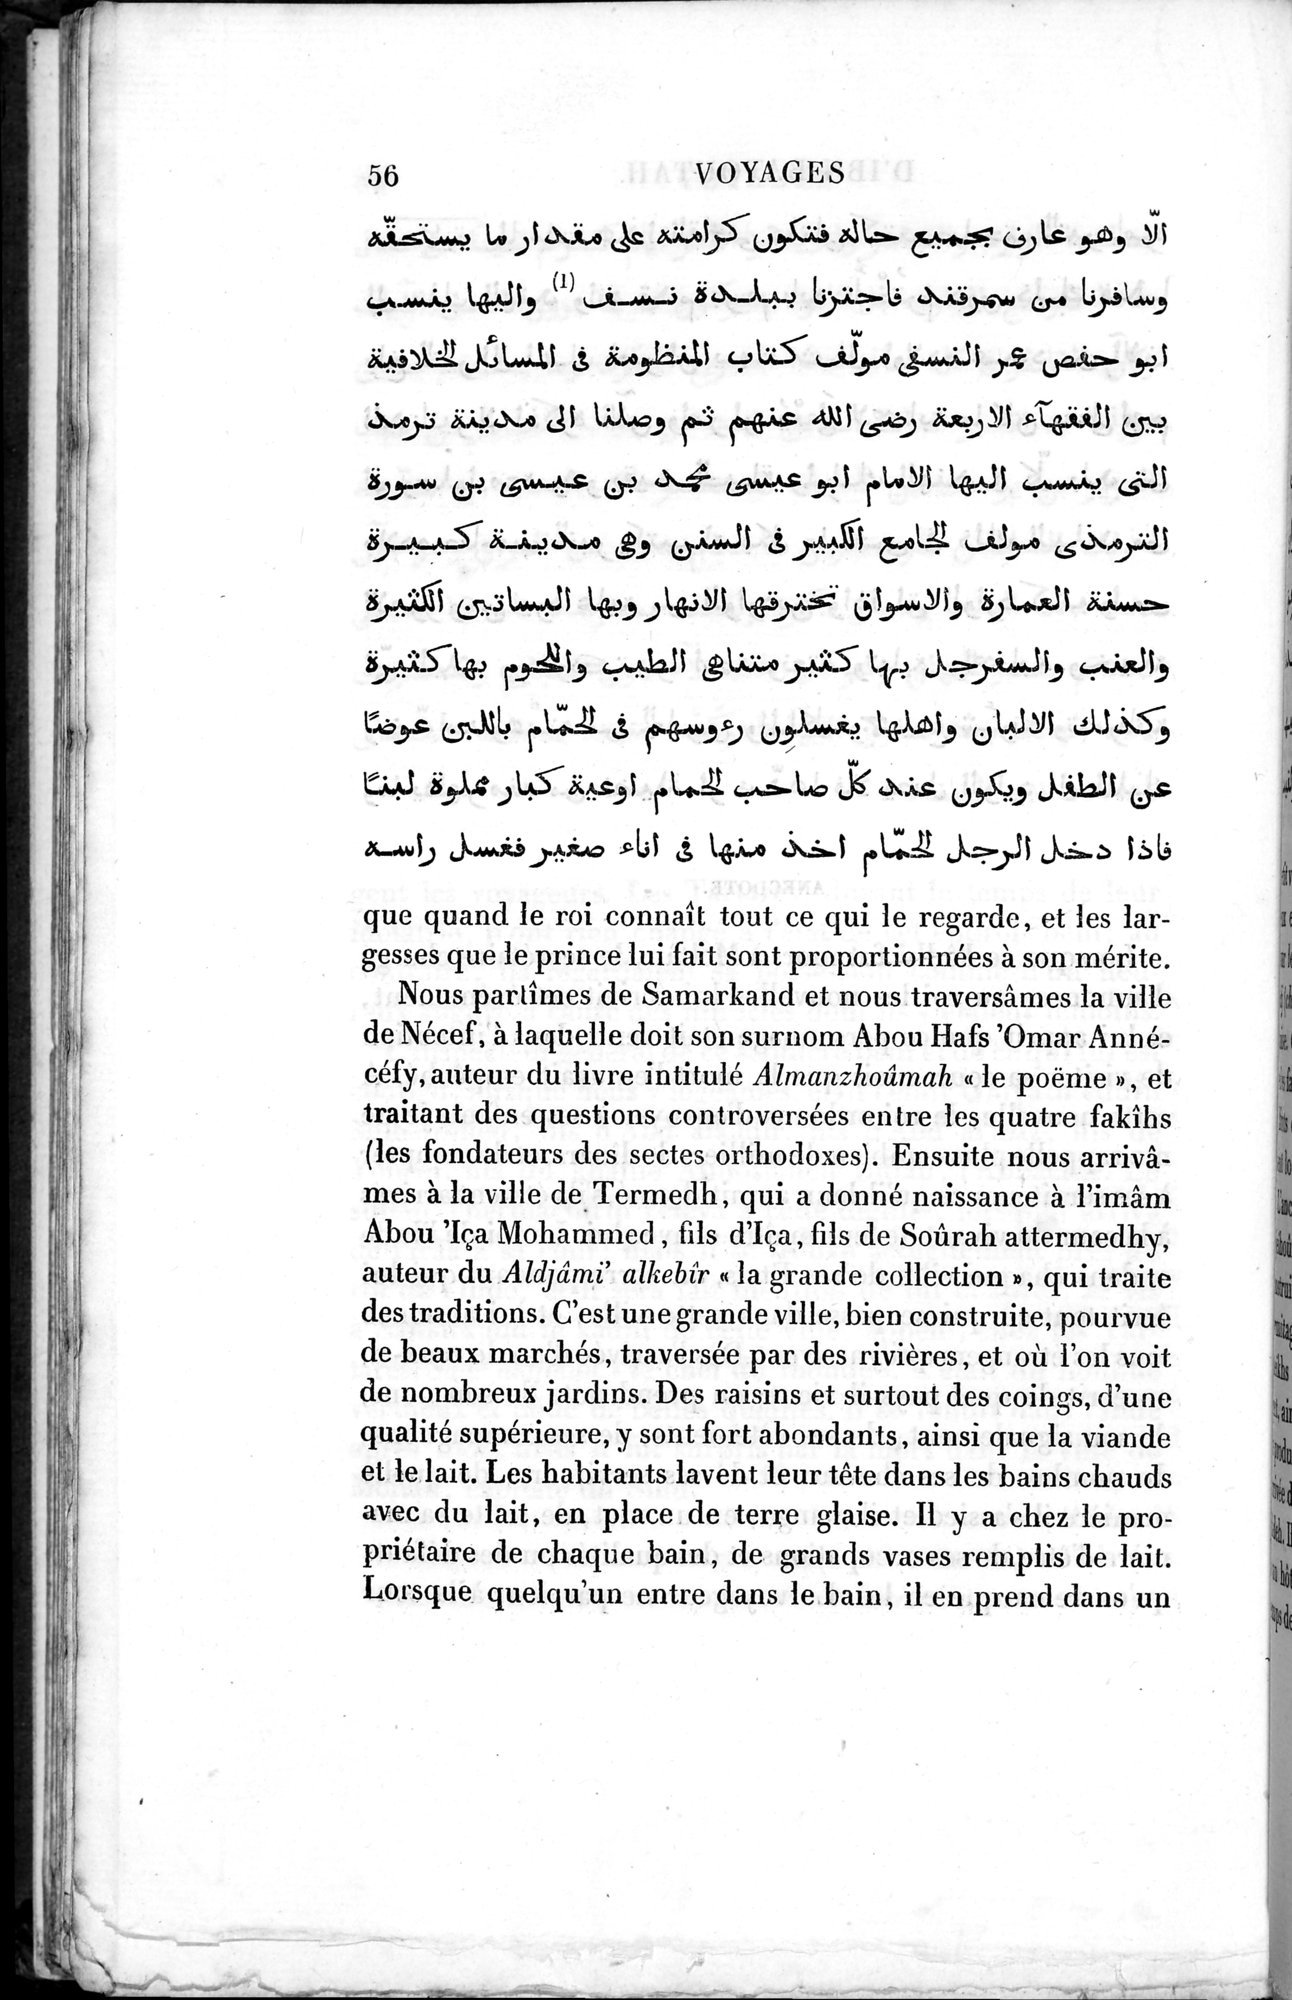 Voyages d'Ibn Batoutah : vol.3 / Page 96 (Grayscale High Resolution Image)